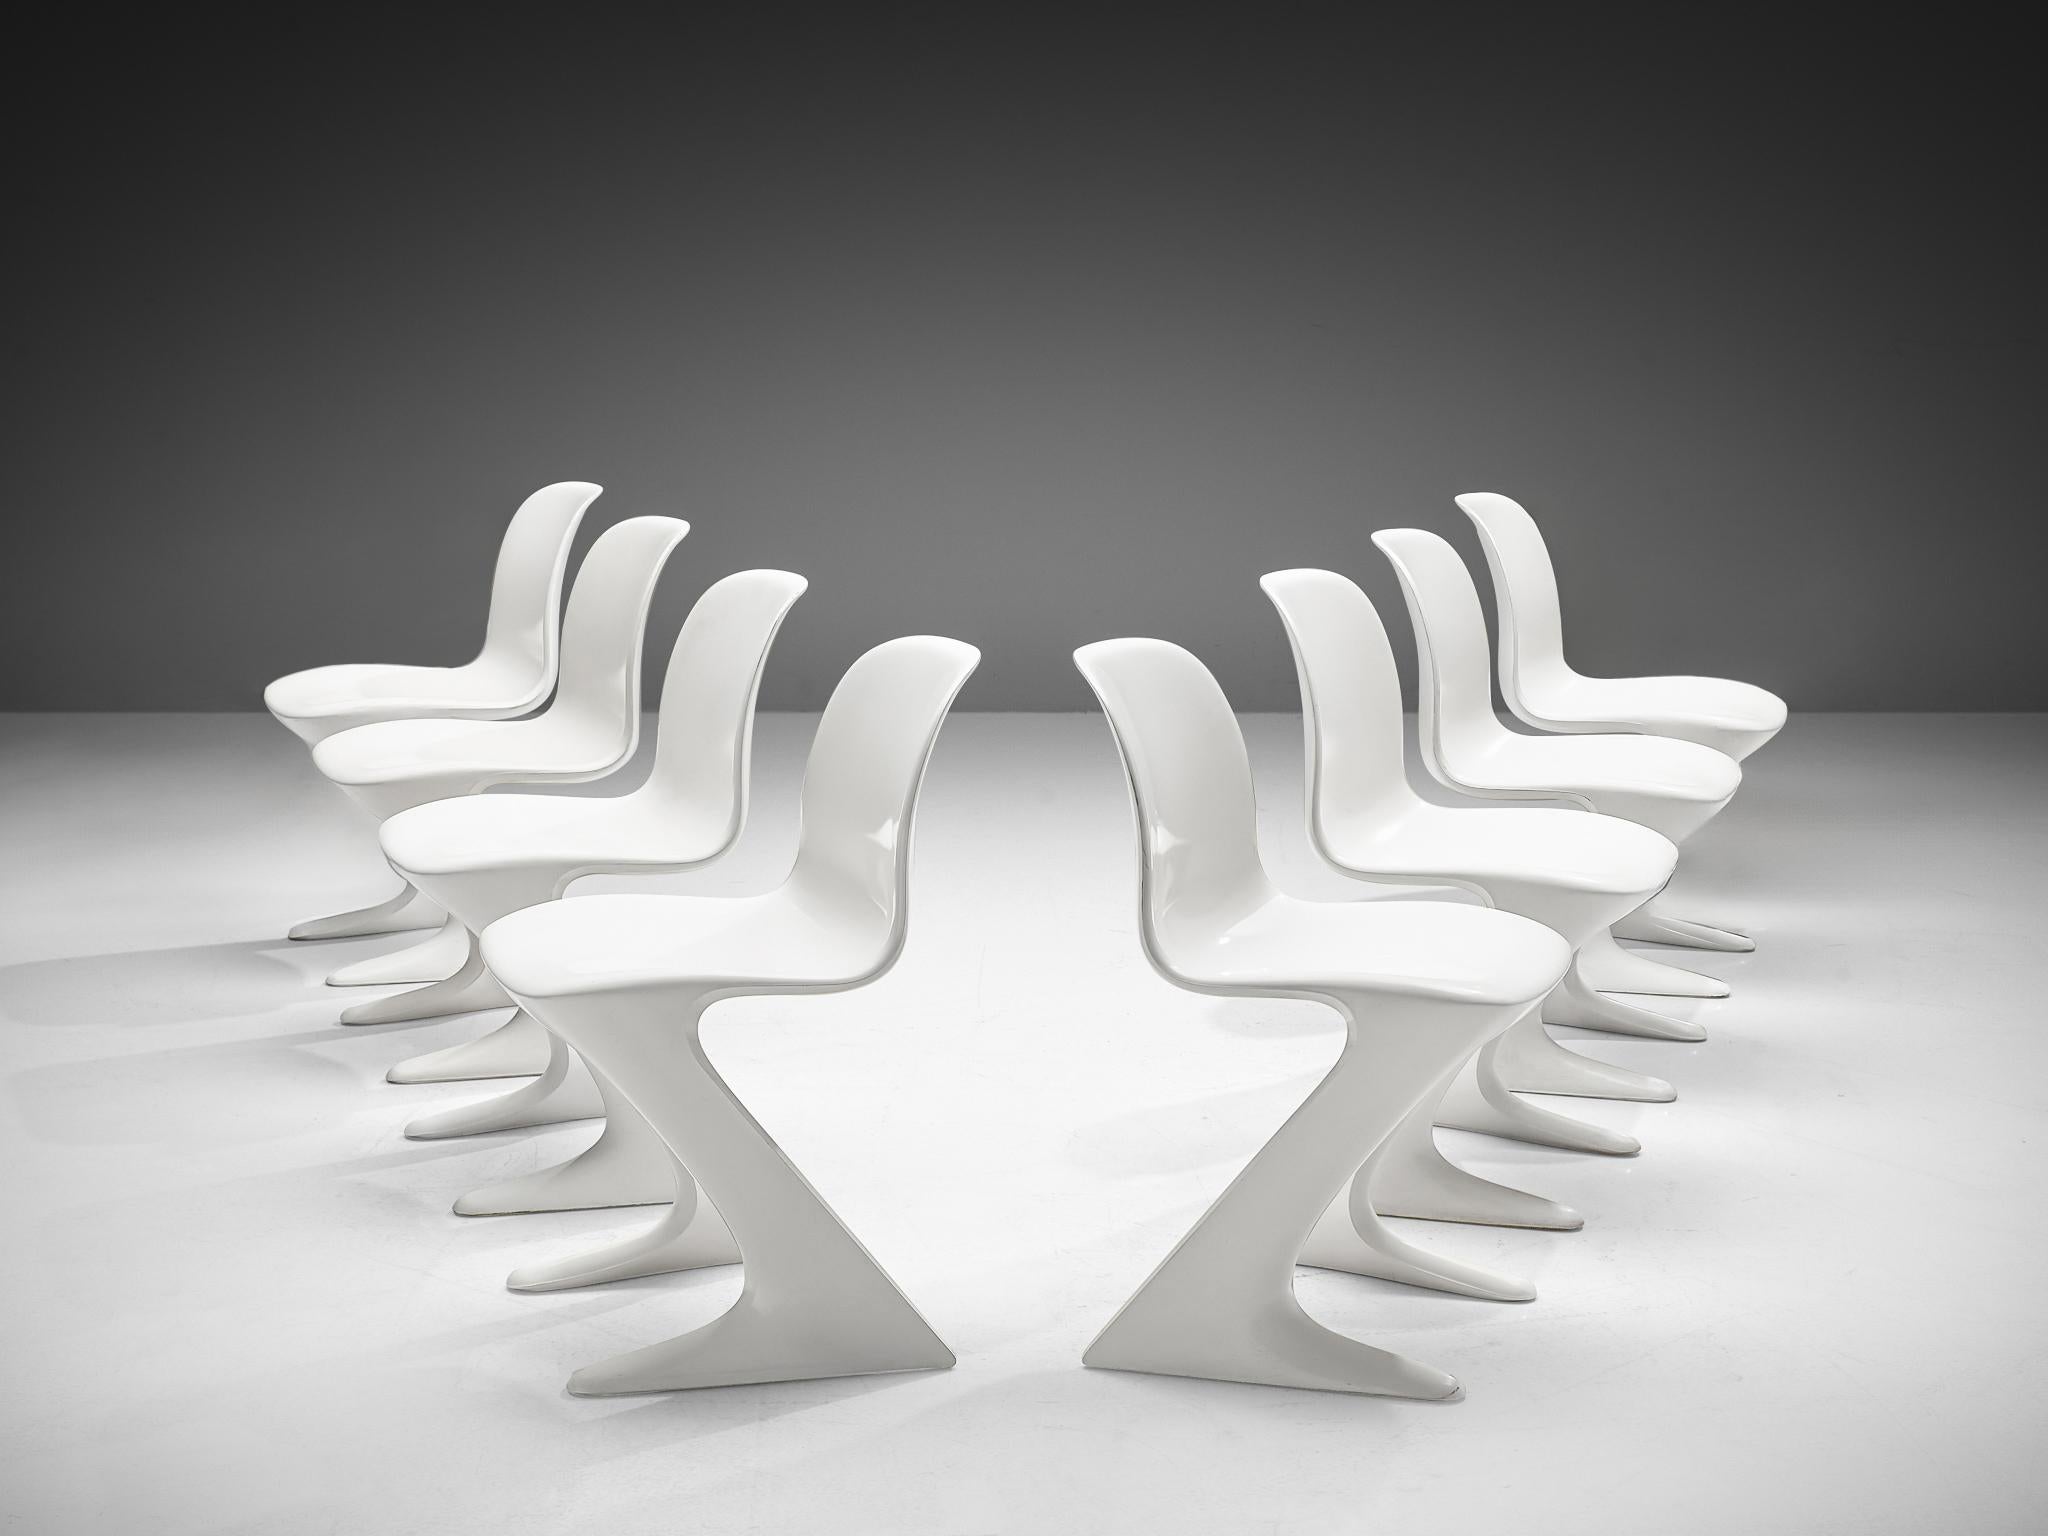 Ernst Moeckl for Trabant, set of eight 'Z' chairs, fiberglass, Germany, 1968

This set of Kangaroo chairs is designed by Ernste Moeckl in 1968. The chair is also called the Z-chair, referring to its shape. During the period of the Iron Curtain, the